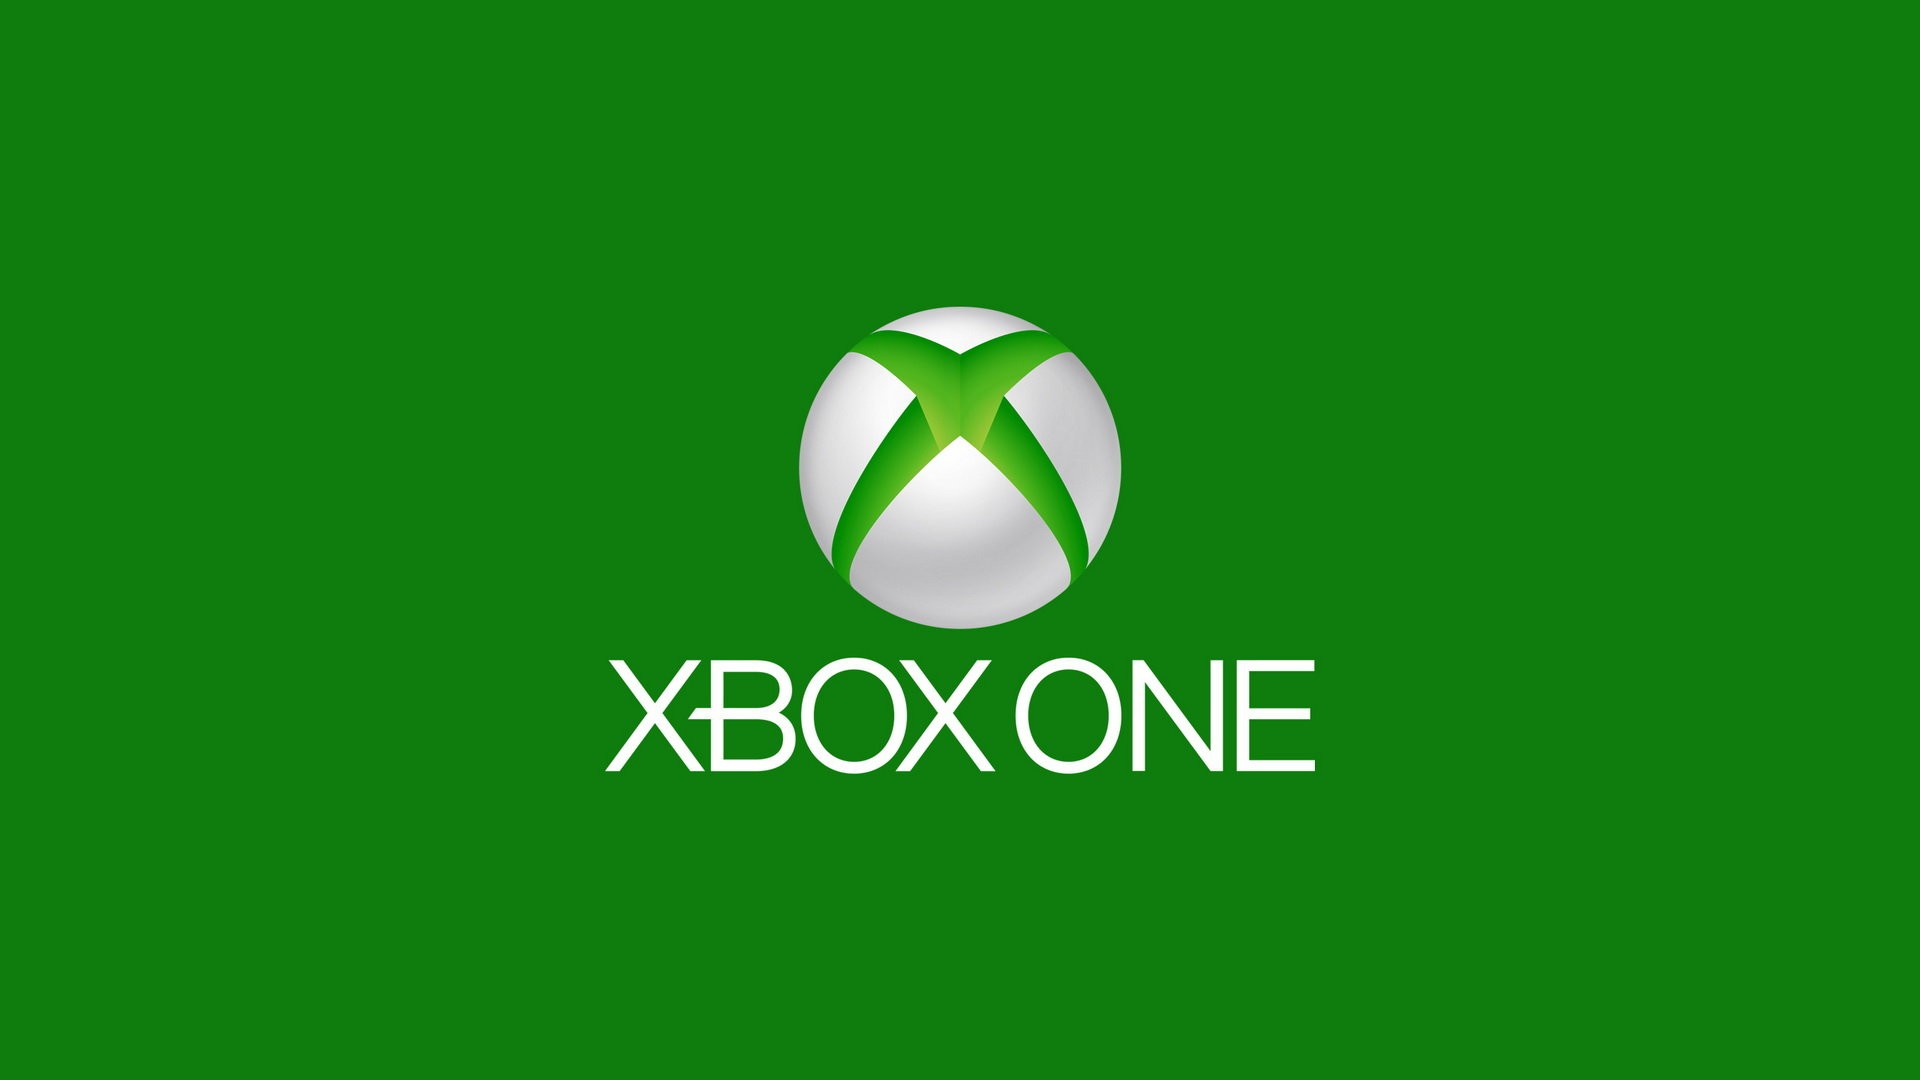 General 1920x1080 Xbox One Microsoft green background video games logo simple background